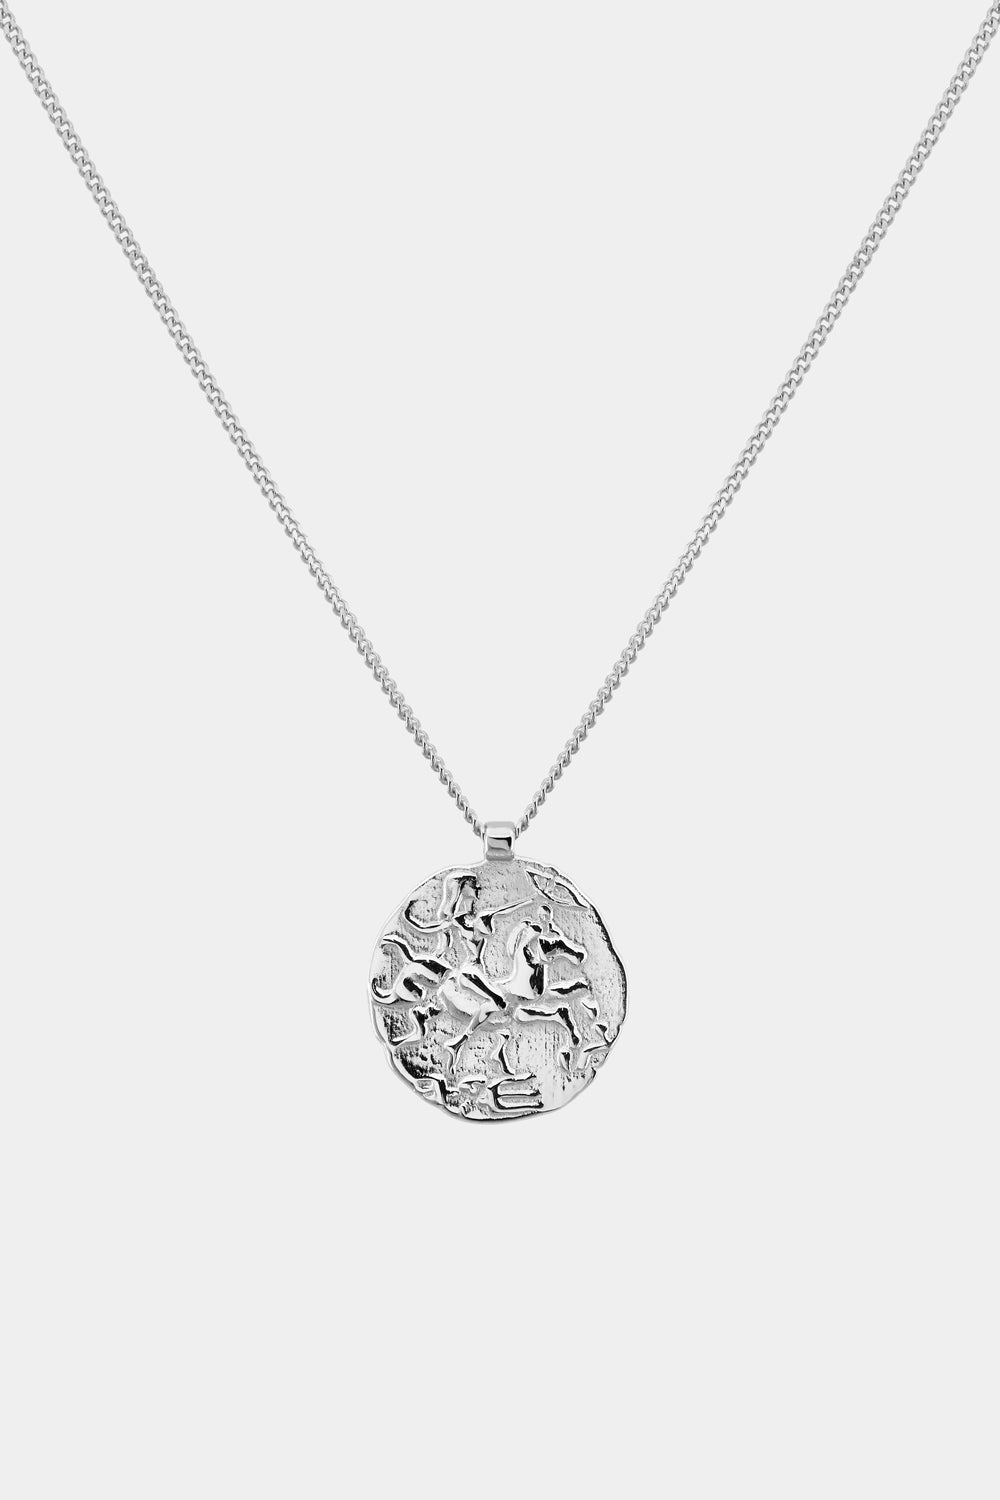 Coin Necklace | Silver or 9K White Gold, More Options Available| Natasha Schweitzer